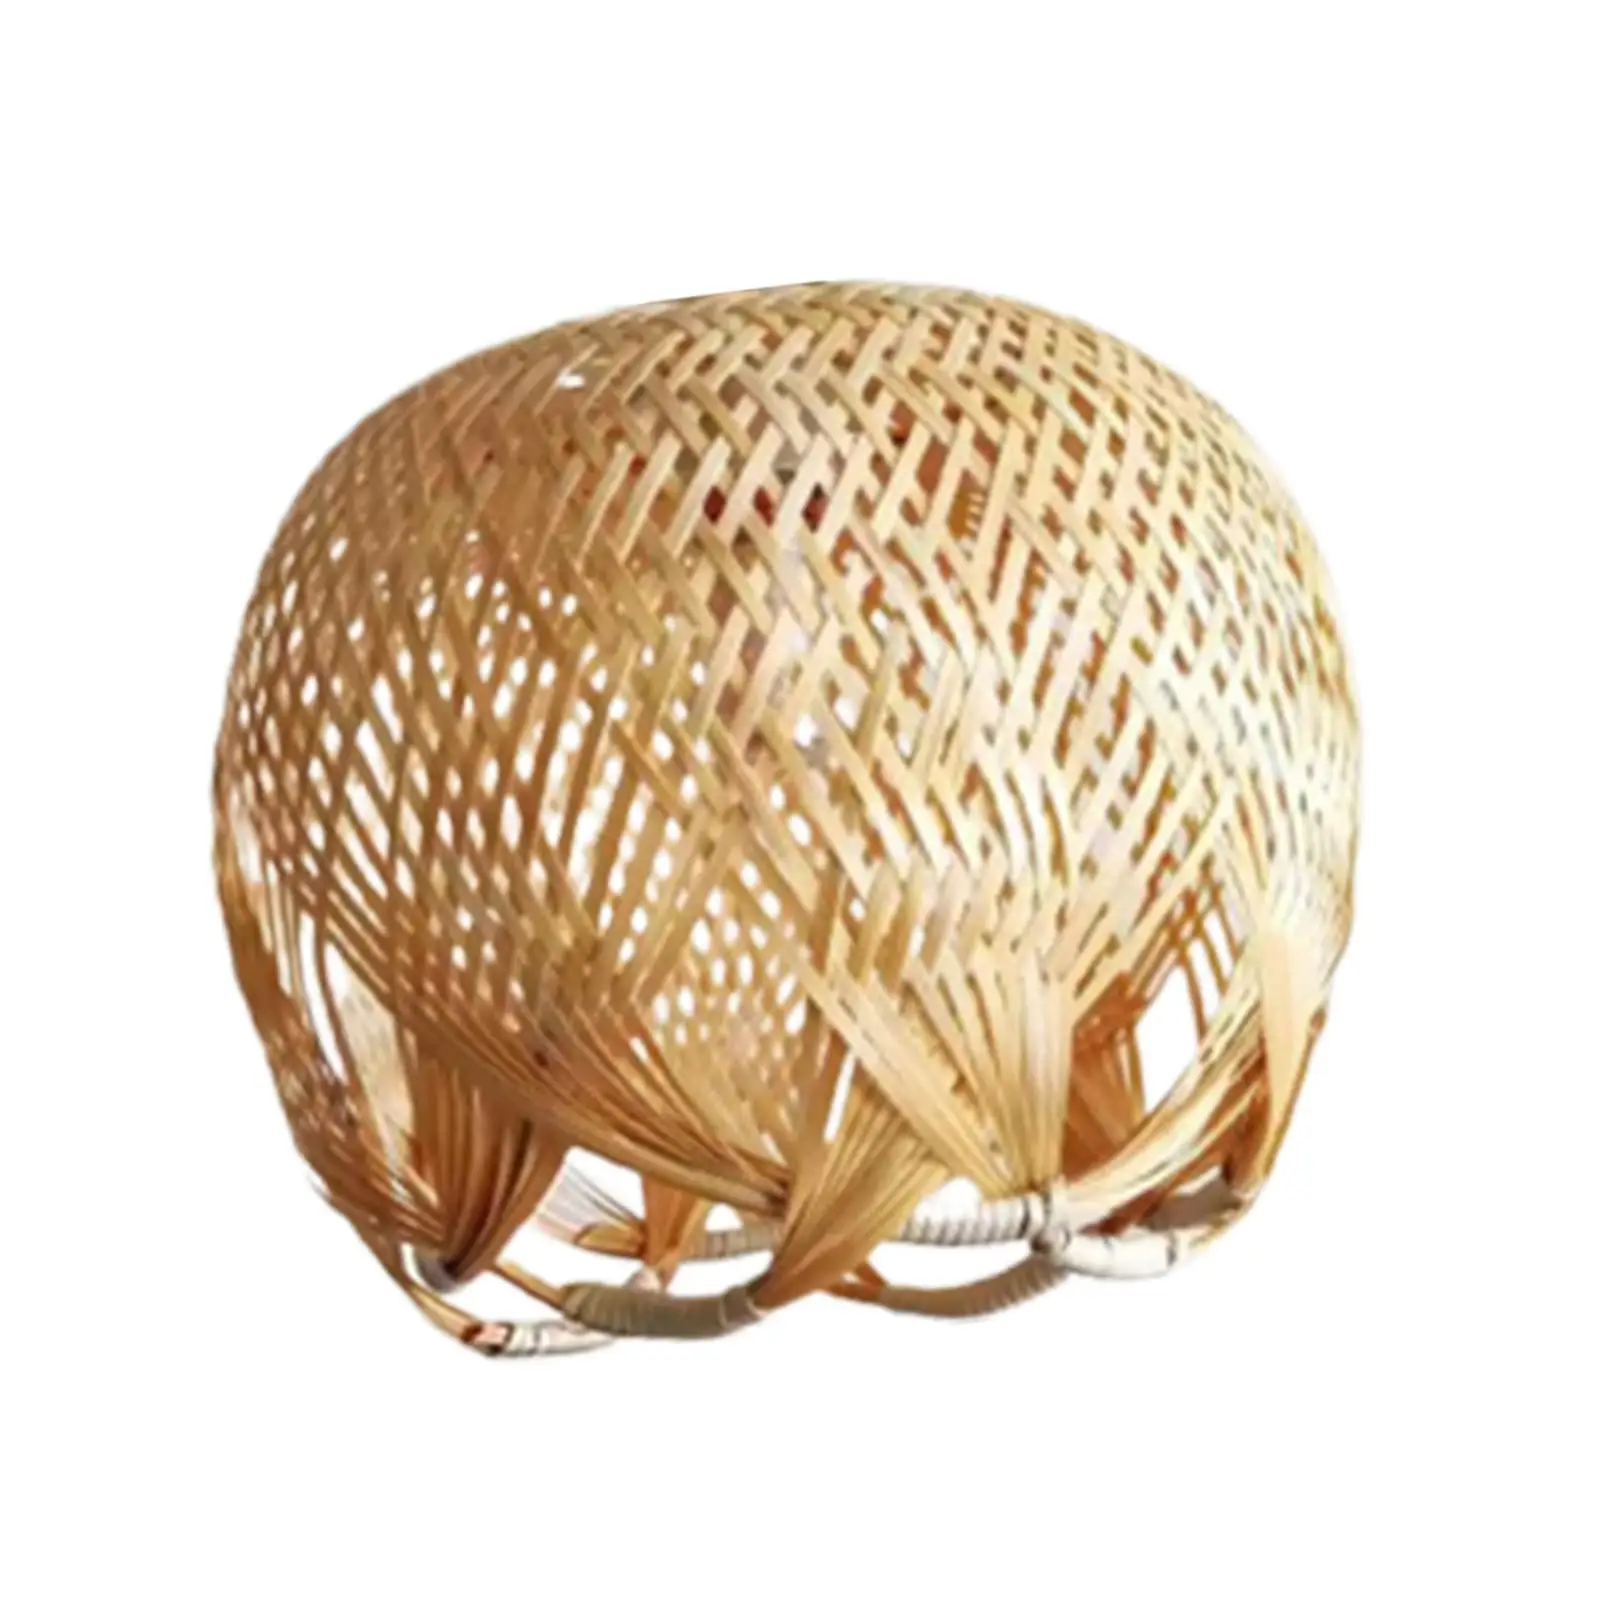 Rattan Hanging Lamp Shade Vintage Light Cover Pendant Lamp Shade Hand Woven for Cafe Living Room Hotel Kitchen Bar